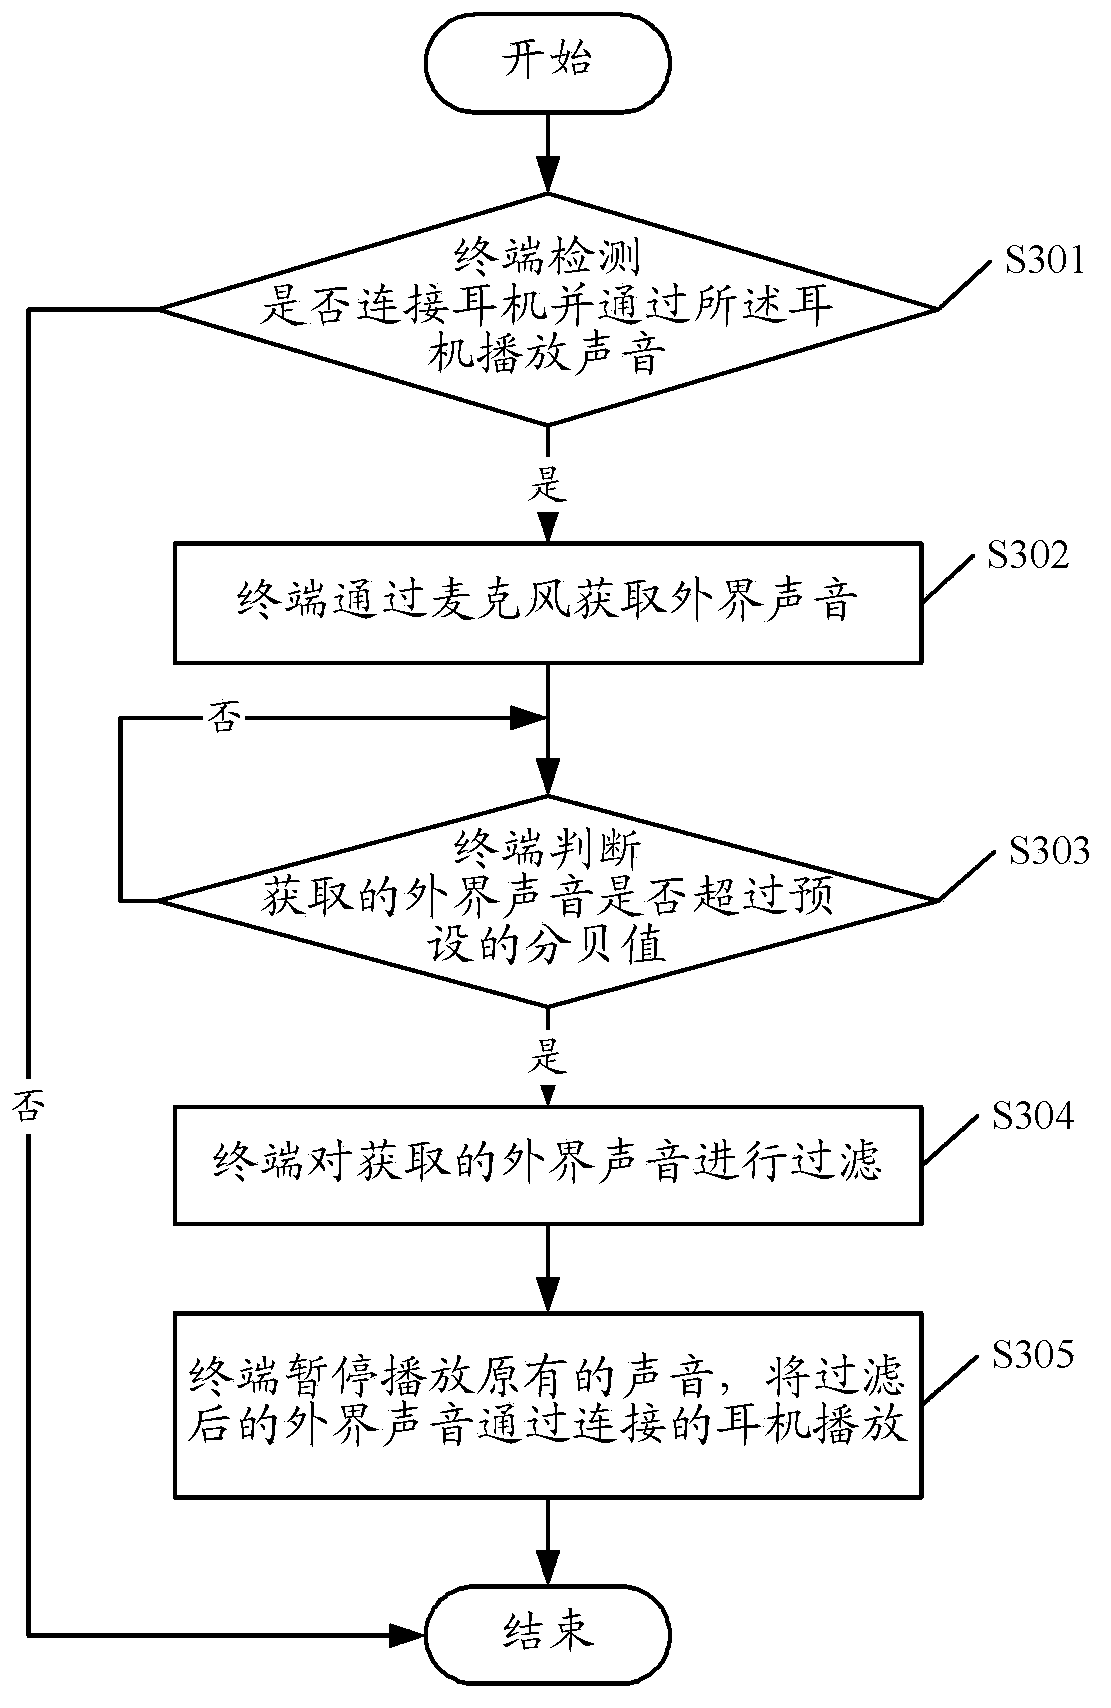 Method and device for offering voice